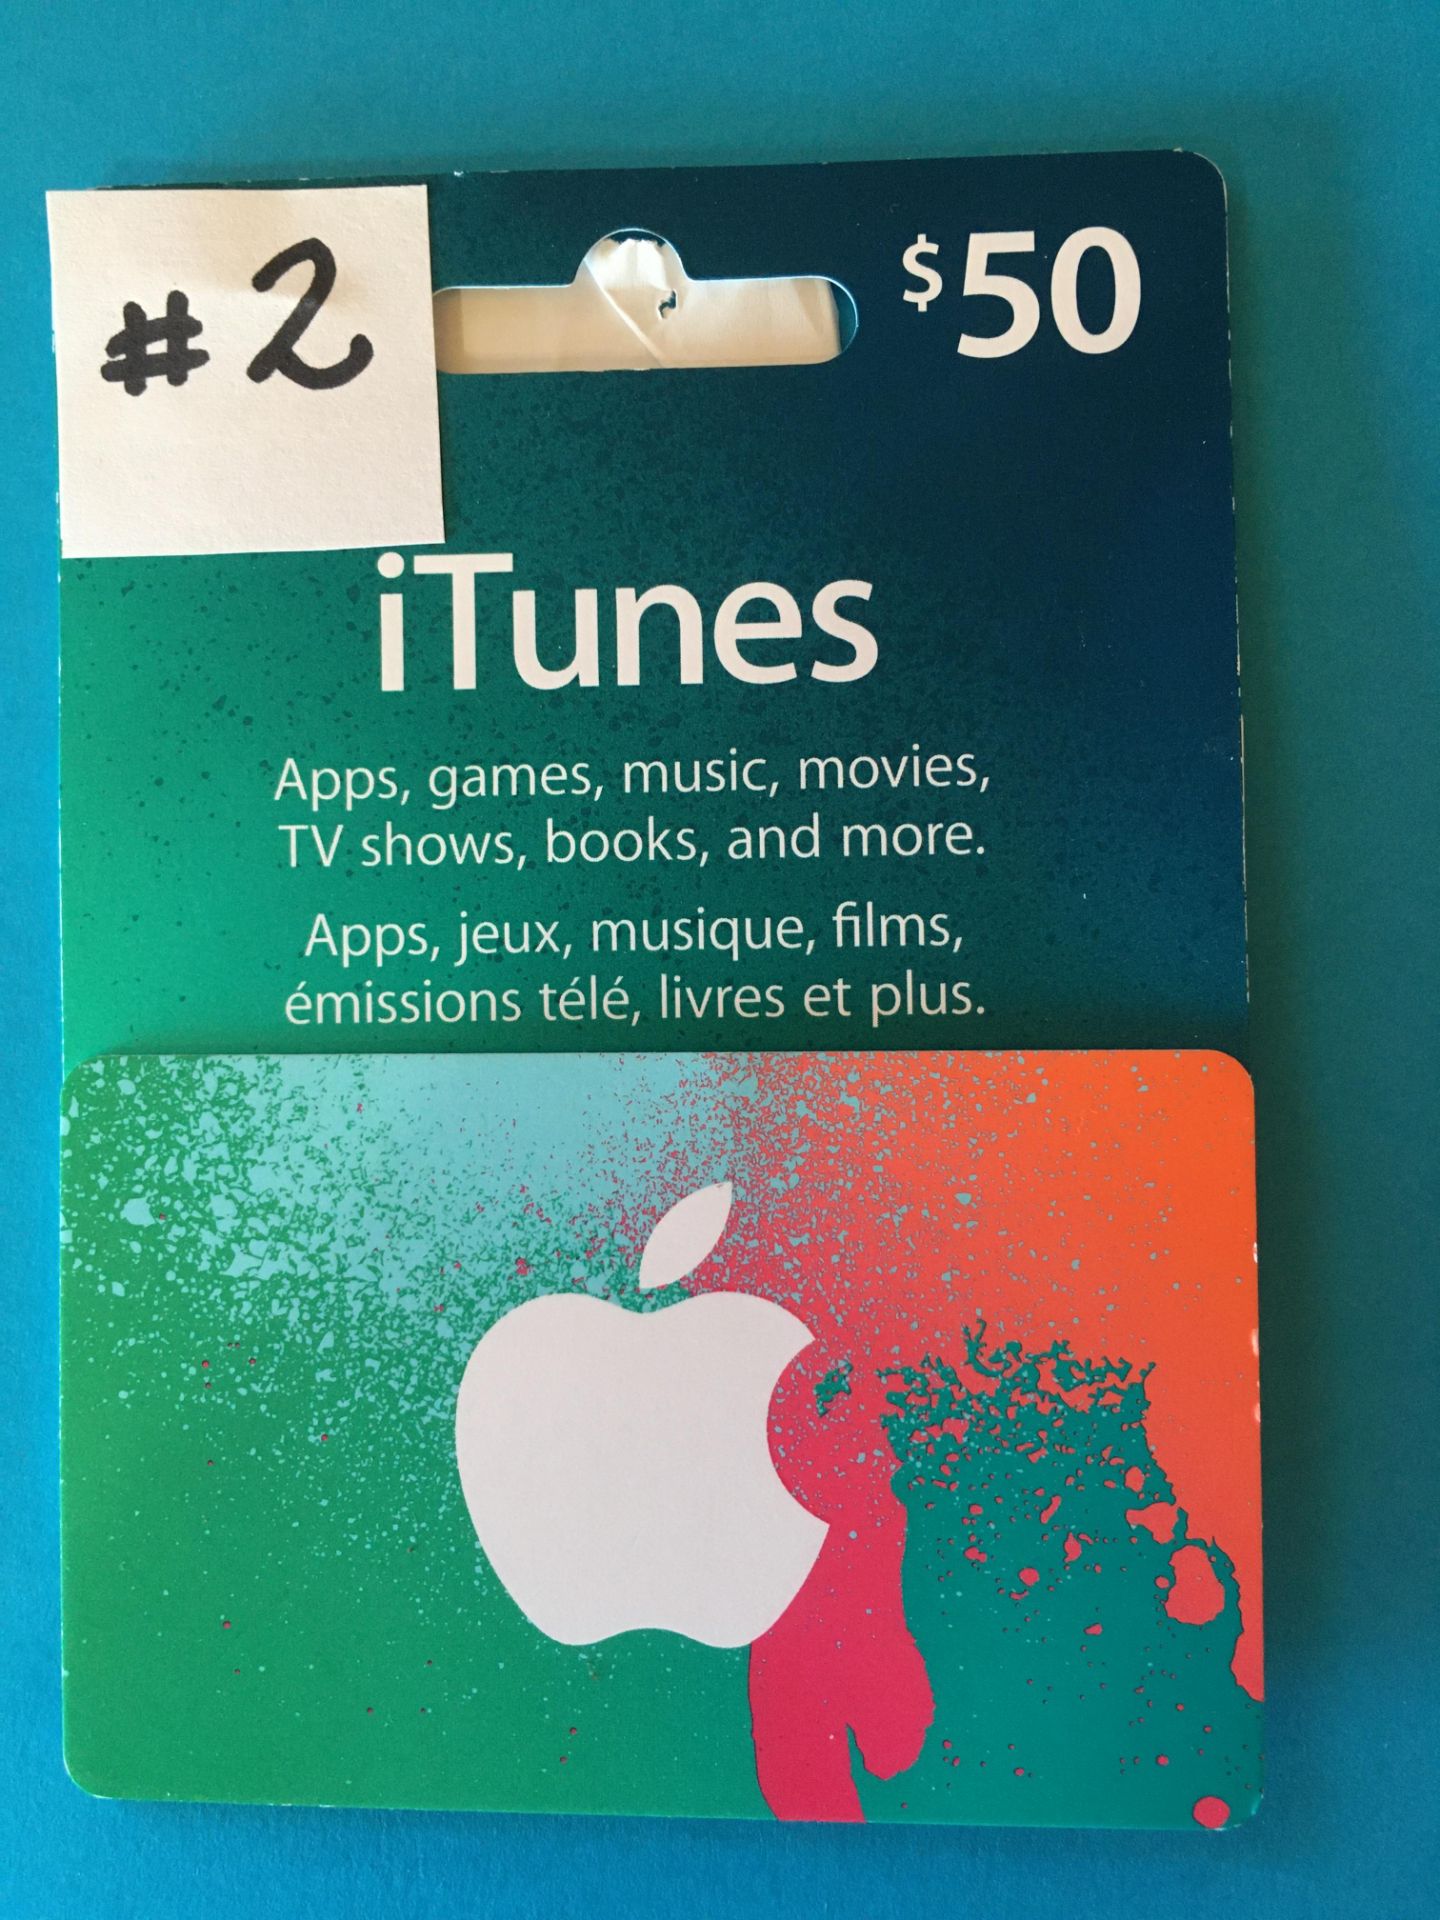 $50.00 iTunes GIFT CARD Donated by: RCS Value: $50.00